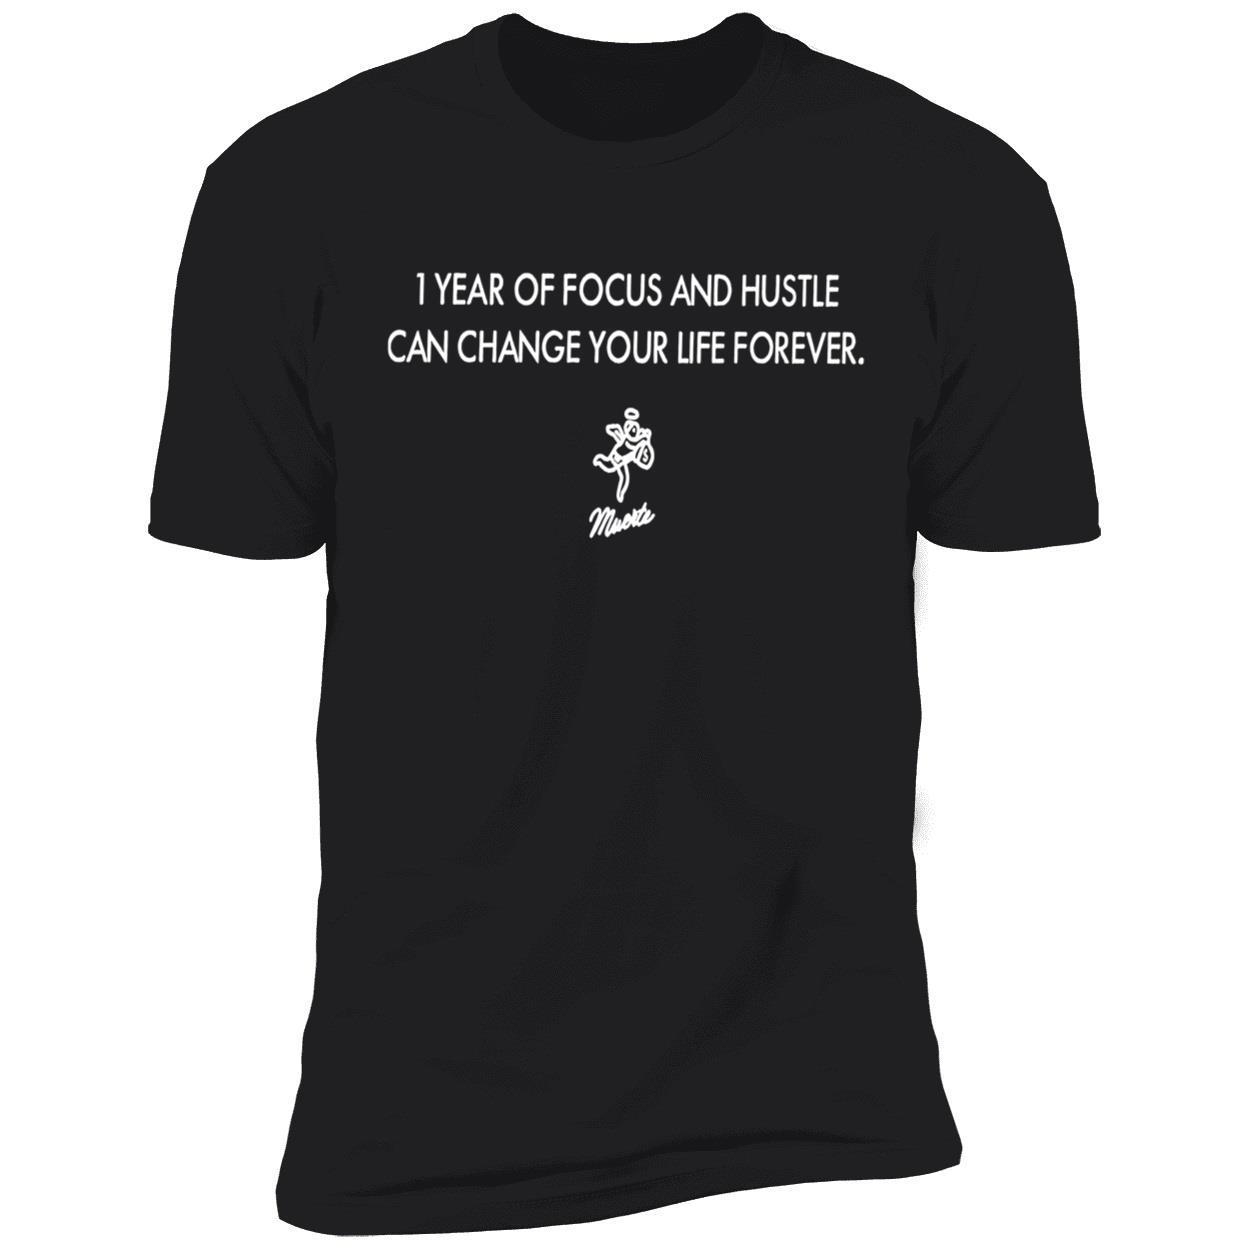 1 Year Of Focus And Hustle Can Change Your Life Forever Shirt